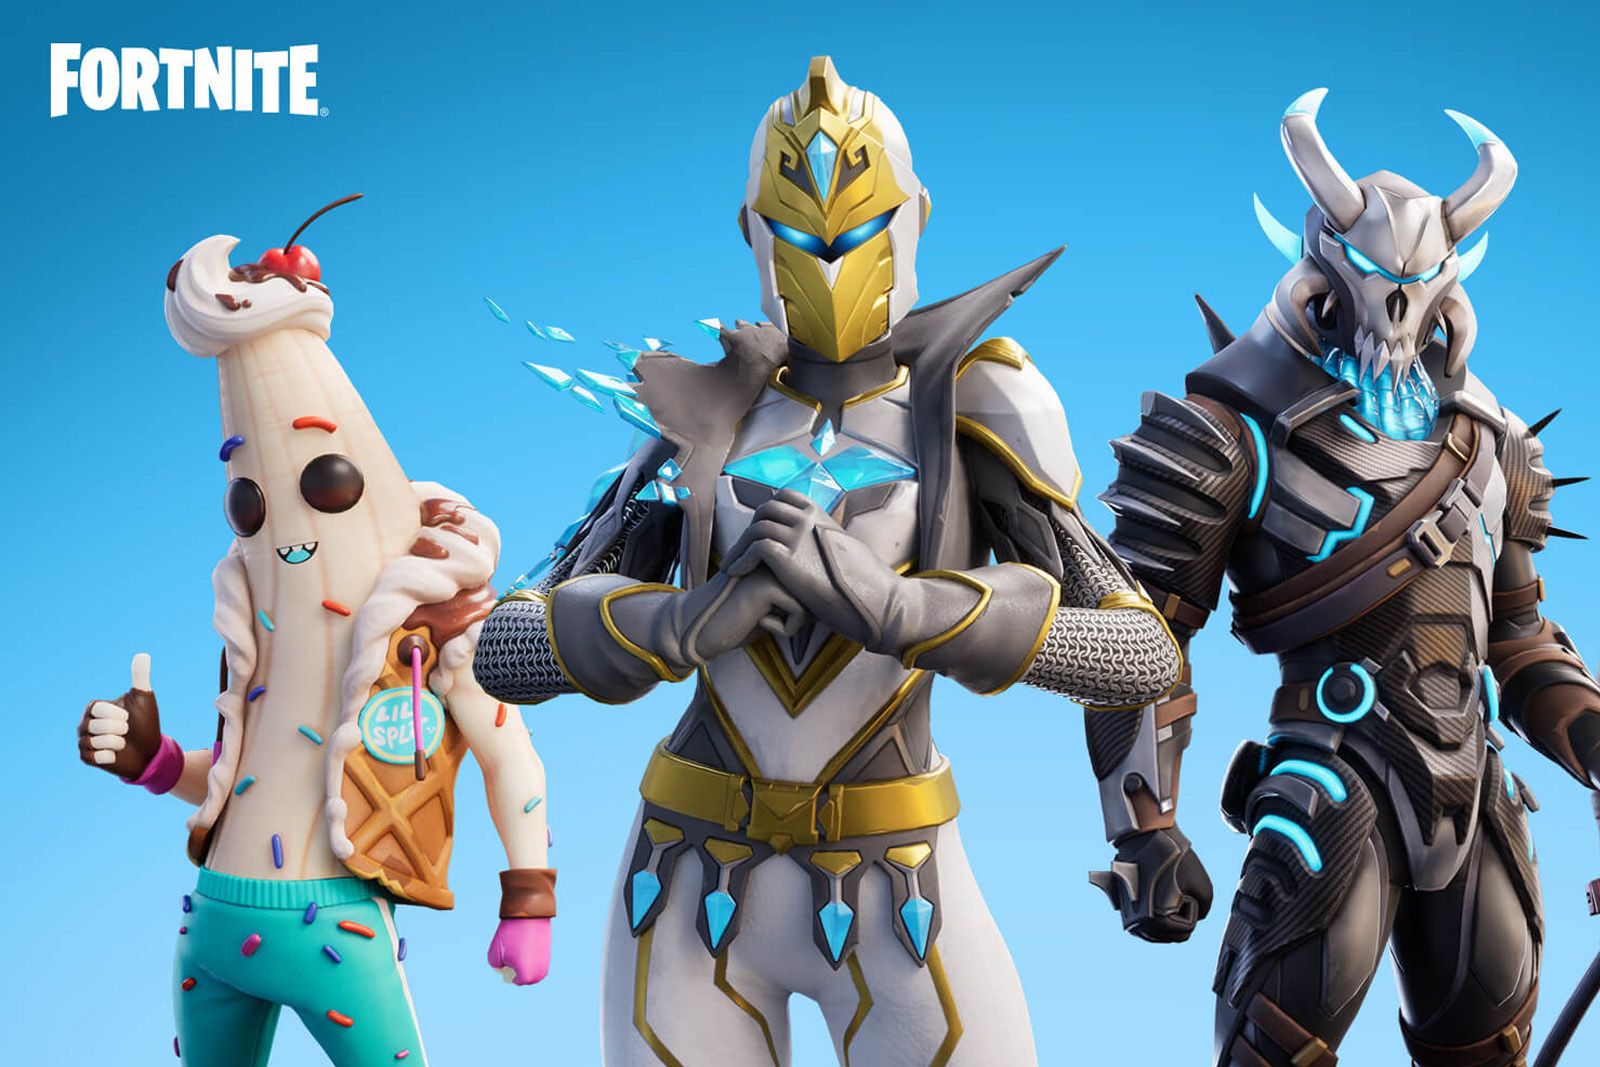 Fortnite age ratings and parental controls explained for parents